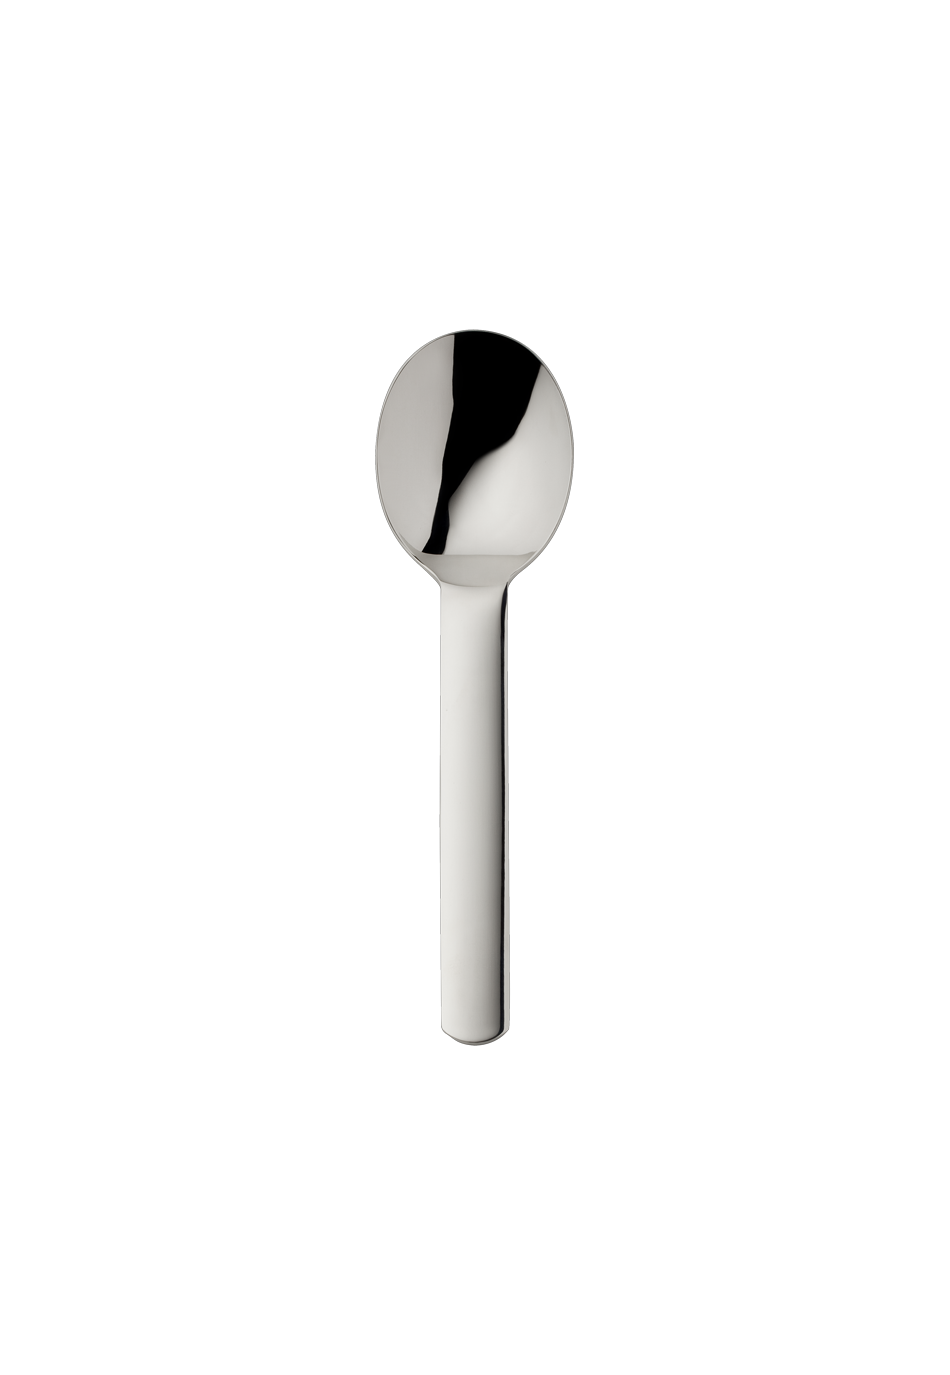 Topos Cream Spoon (Broth Spoon) (18/8 stainless steel)